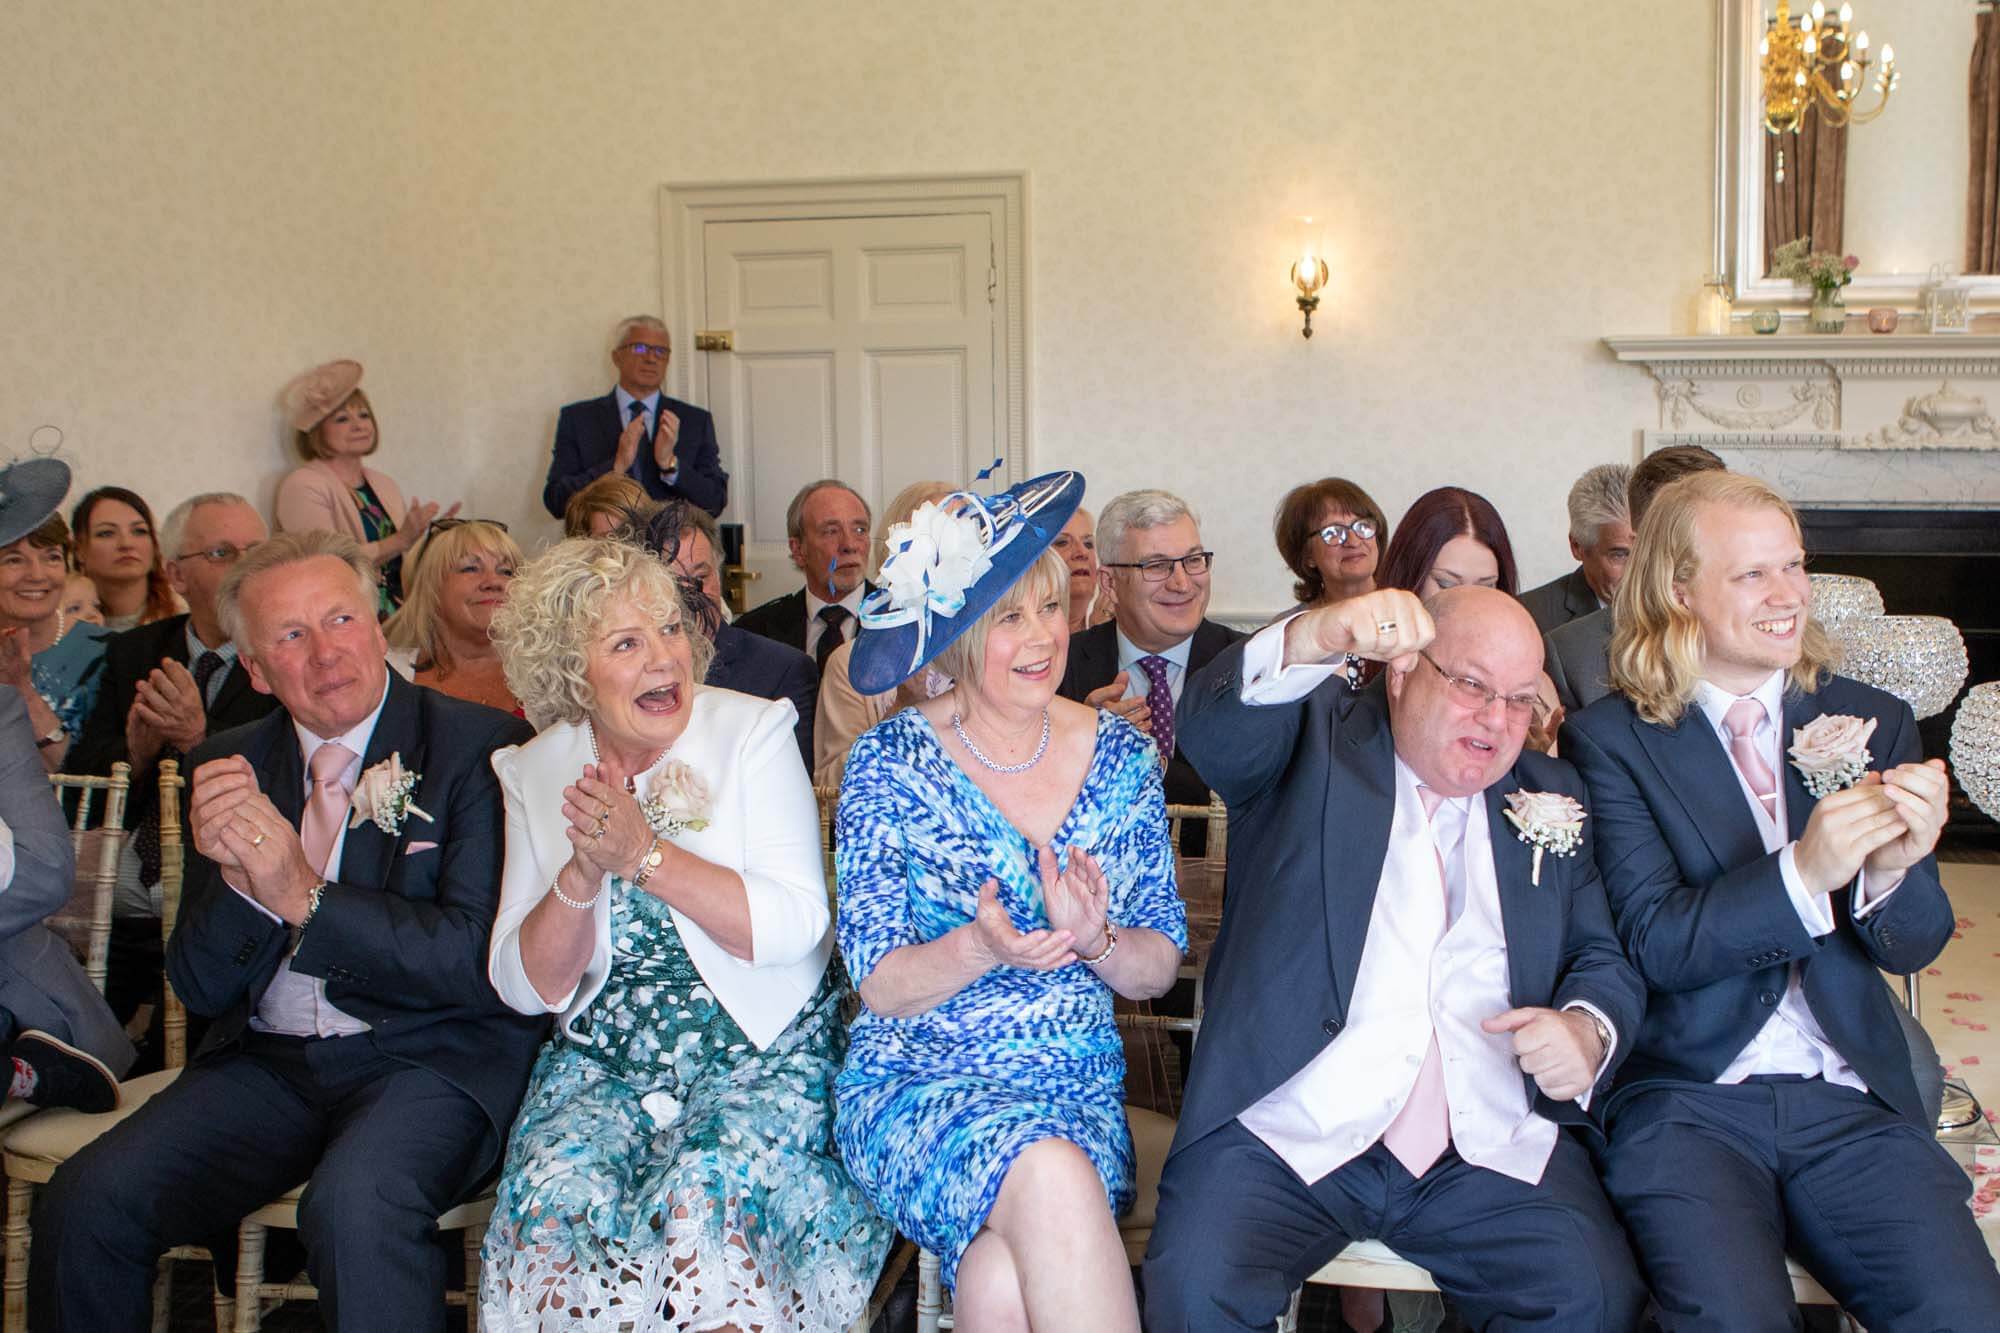 the father of the bride punches the air as all of the guests celebrate the marriage